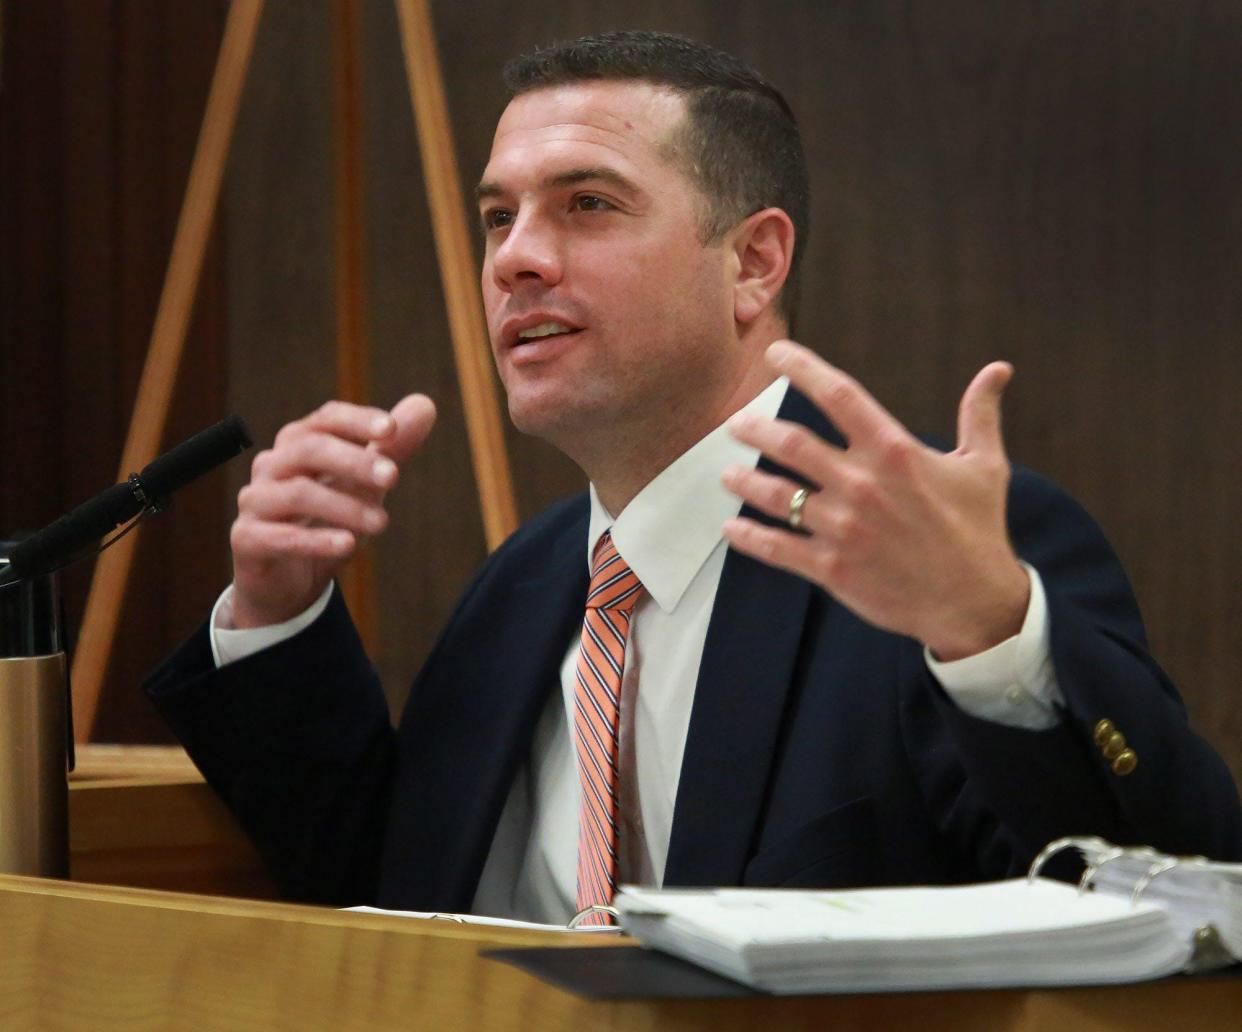 Sgt. Aaron Goodwin of the Portsmouth Police Department, is cross-examined by attorney David Eby while testifying in the Geraldine Webber revocable living trust hearing in the 7th Circuit-Probate Division-Dover in 2015.